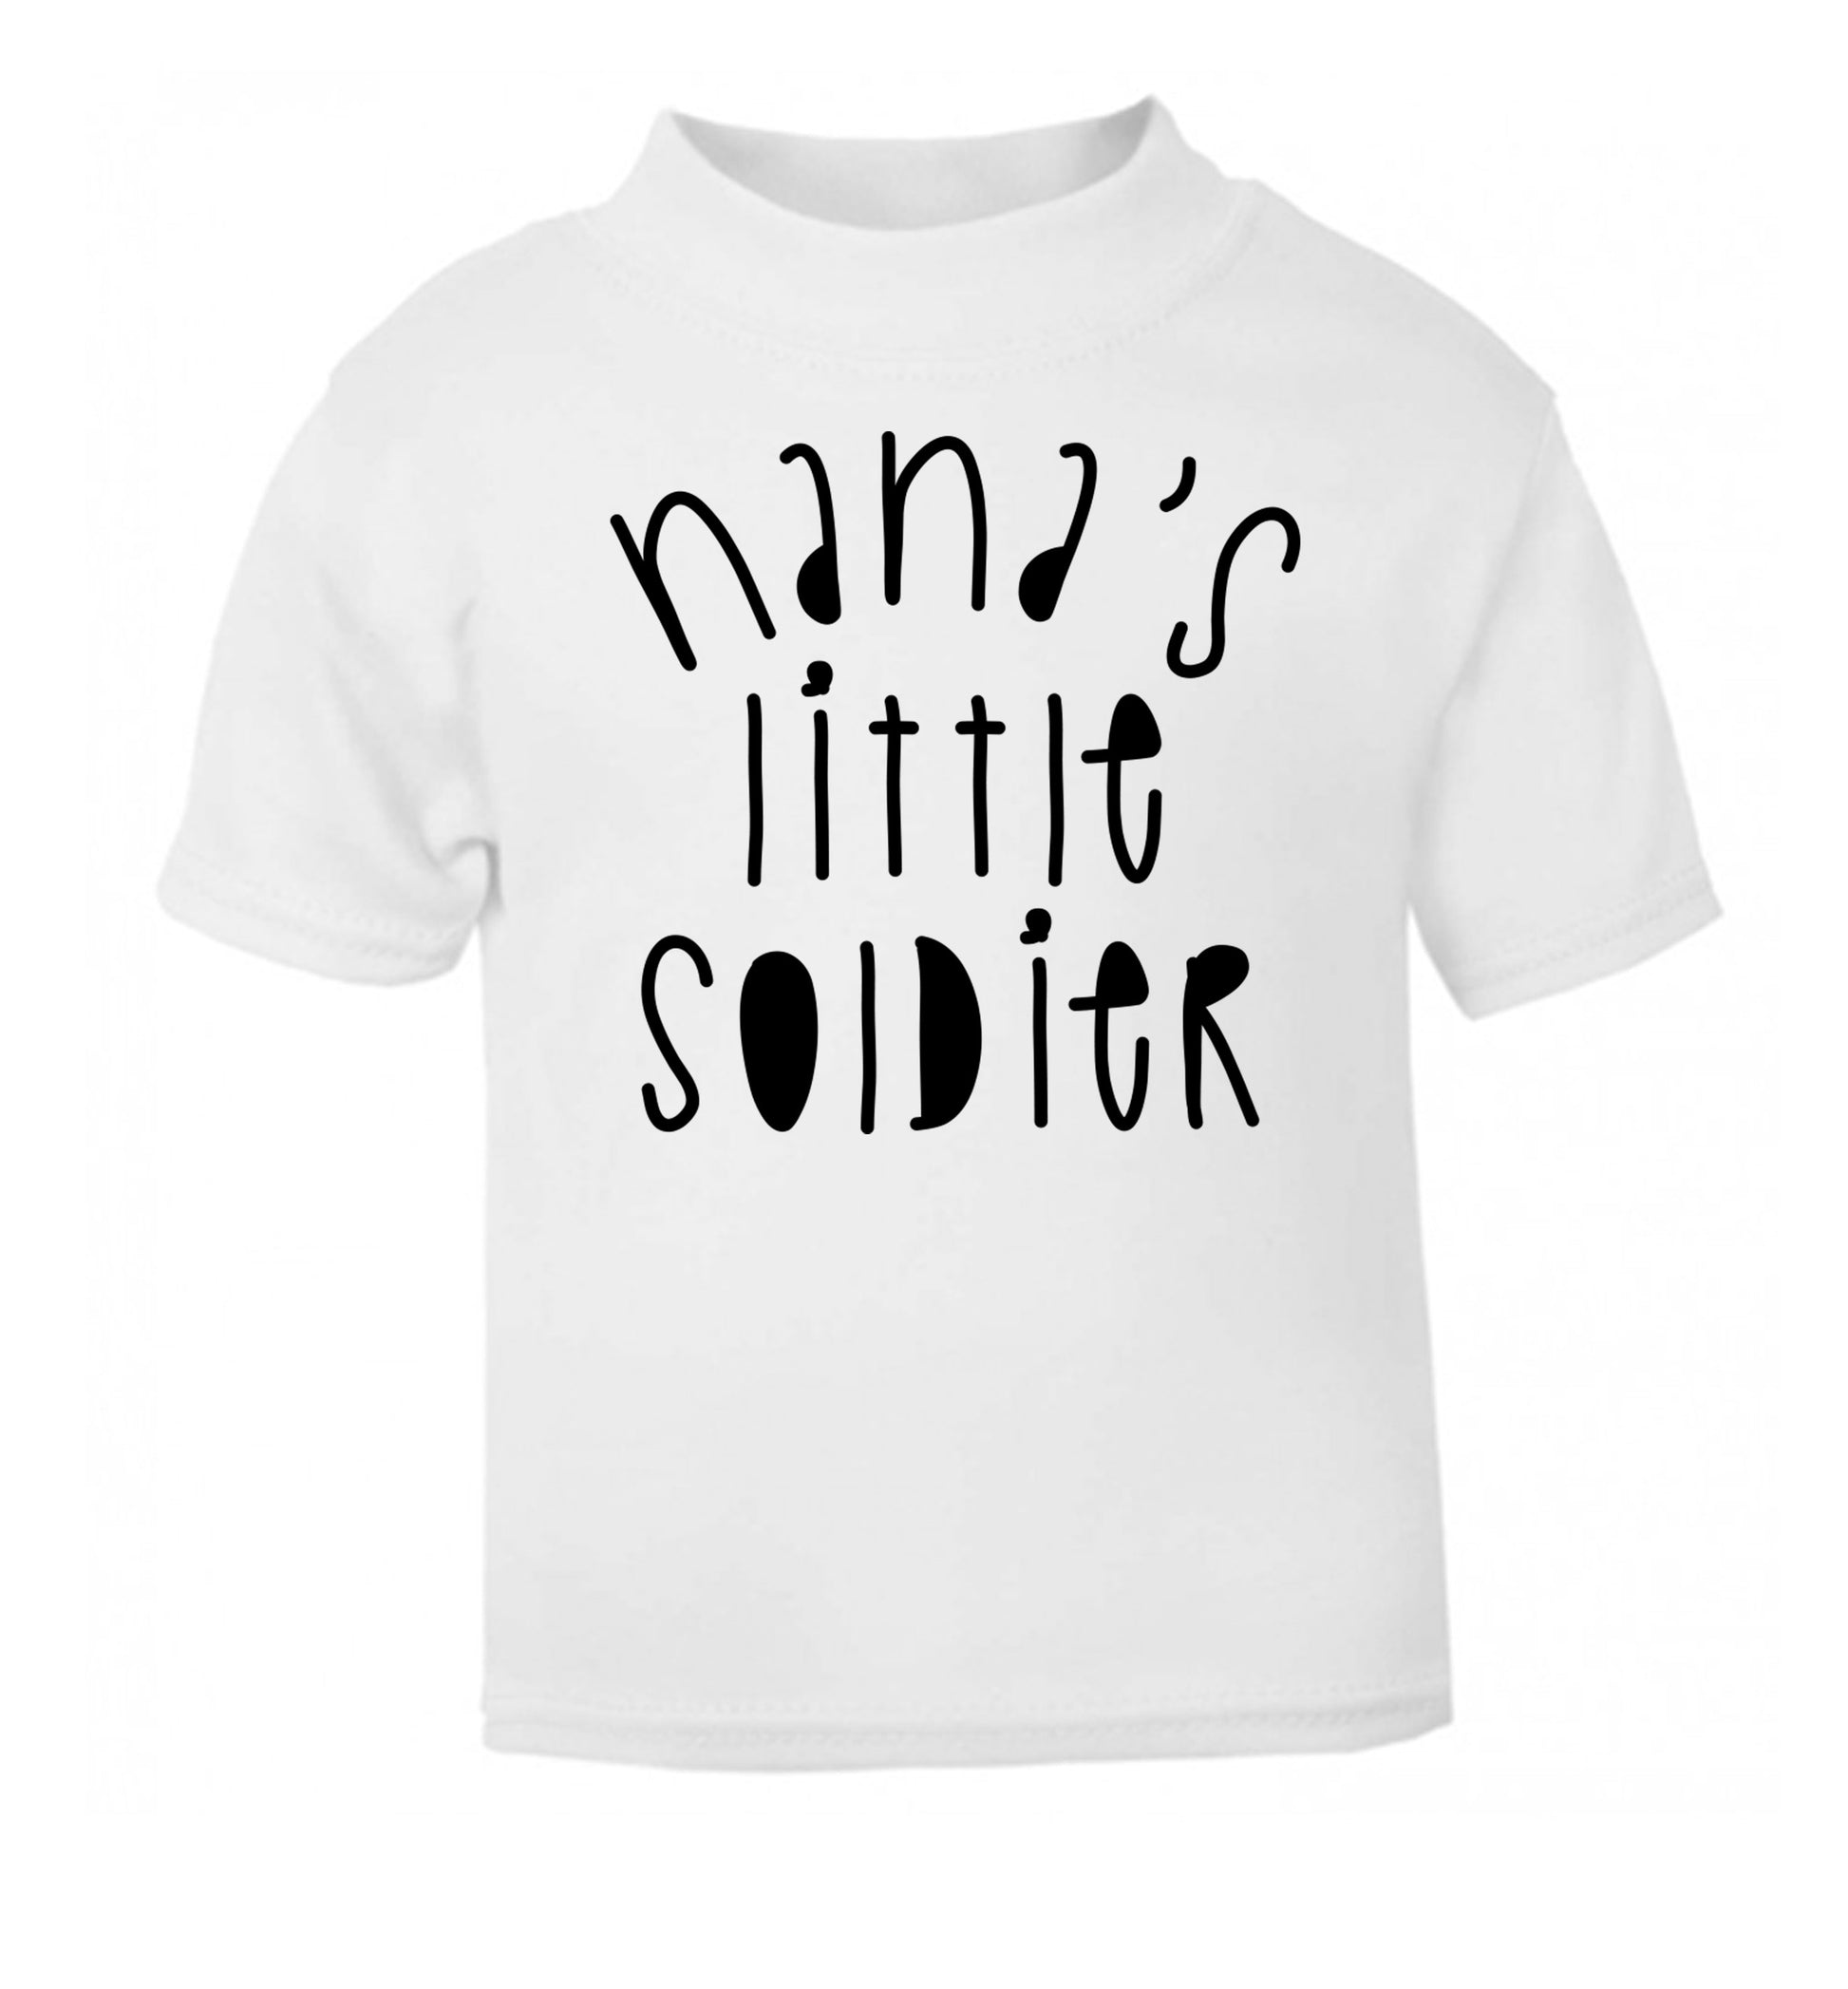 Nana's little soldier white Baby Toddler Tshirt 2 Years